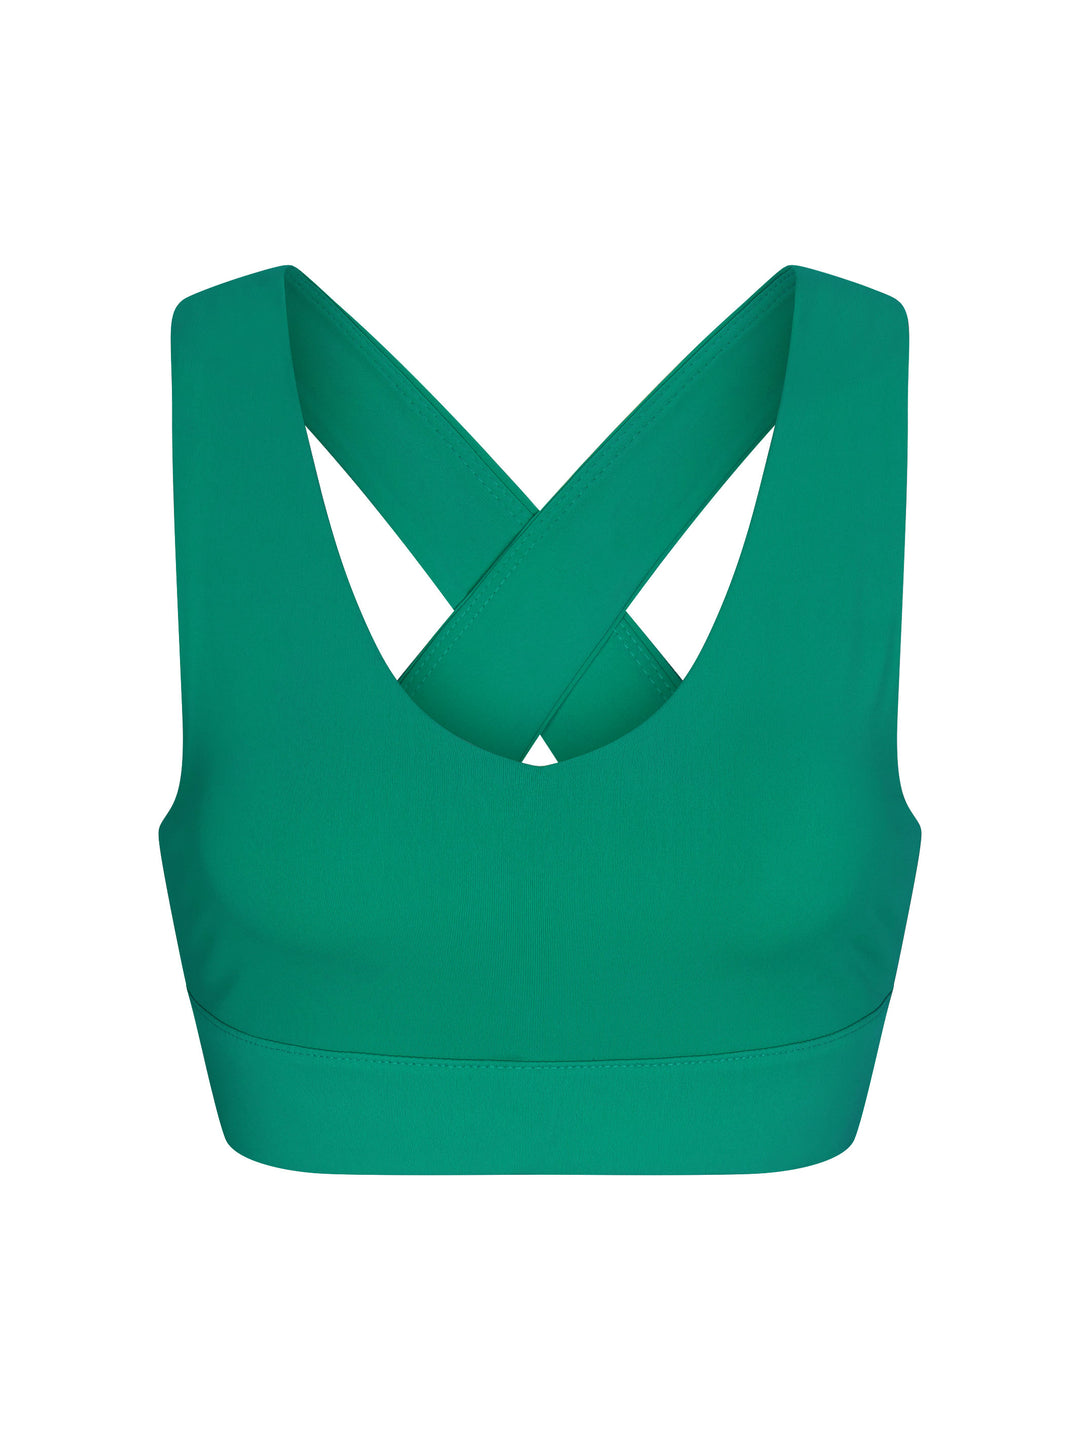 X-Over Back Sports Bra front view in jade.